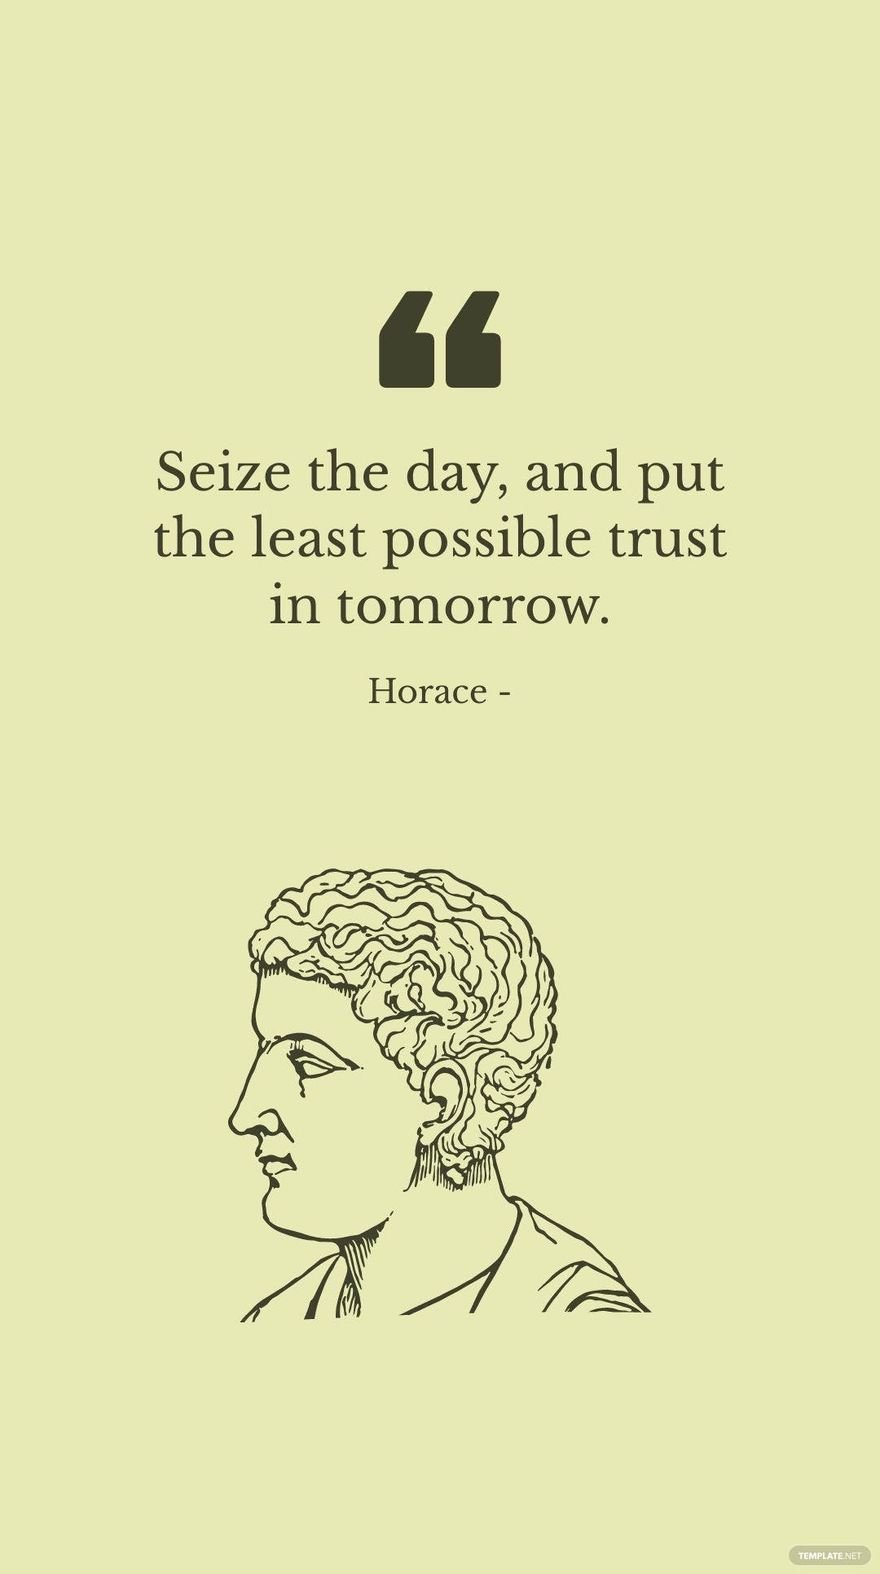 Horace - Seize the day, and put the least possible trust in tomorrow.